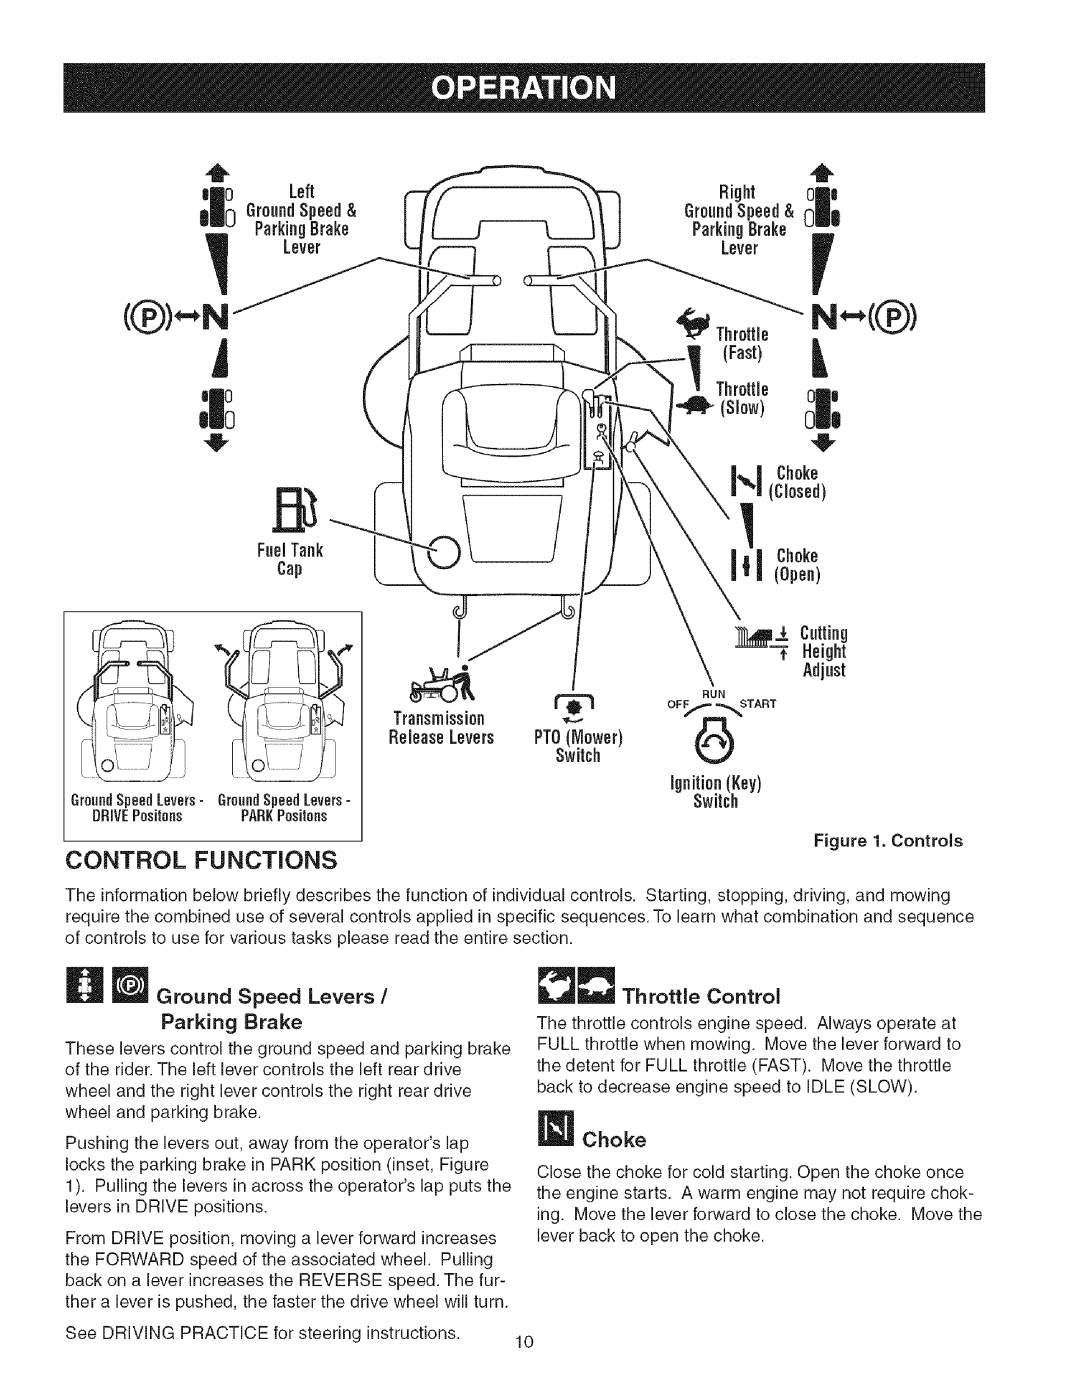 Craftsman 107.27768 Control Functions, Throttle, Slow, Closed, I Choke, Open, Parking Brake, Left, Right, Lever, Fast 